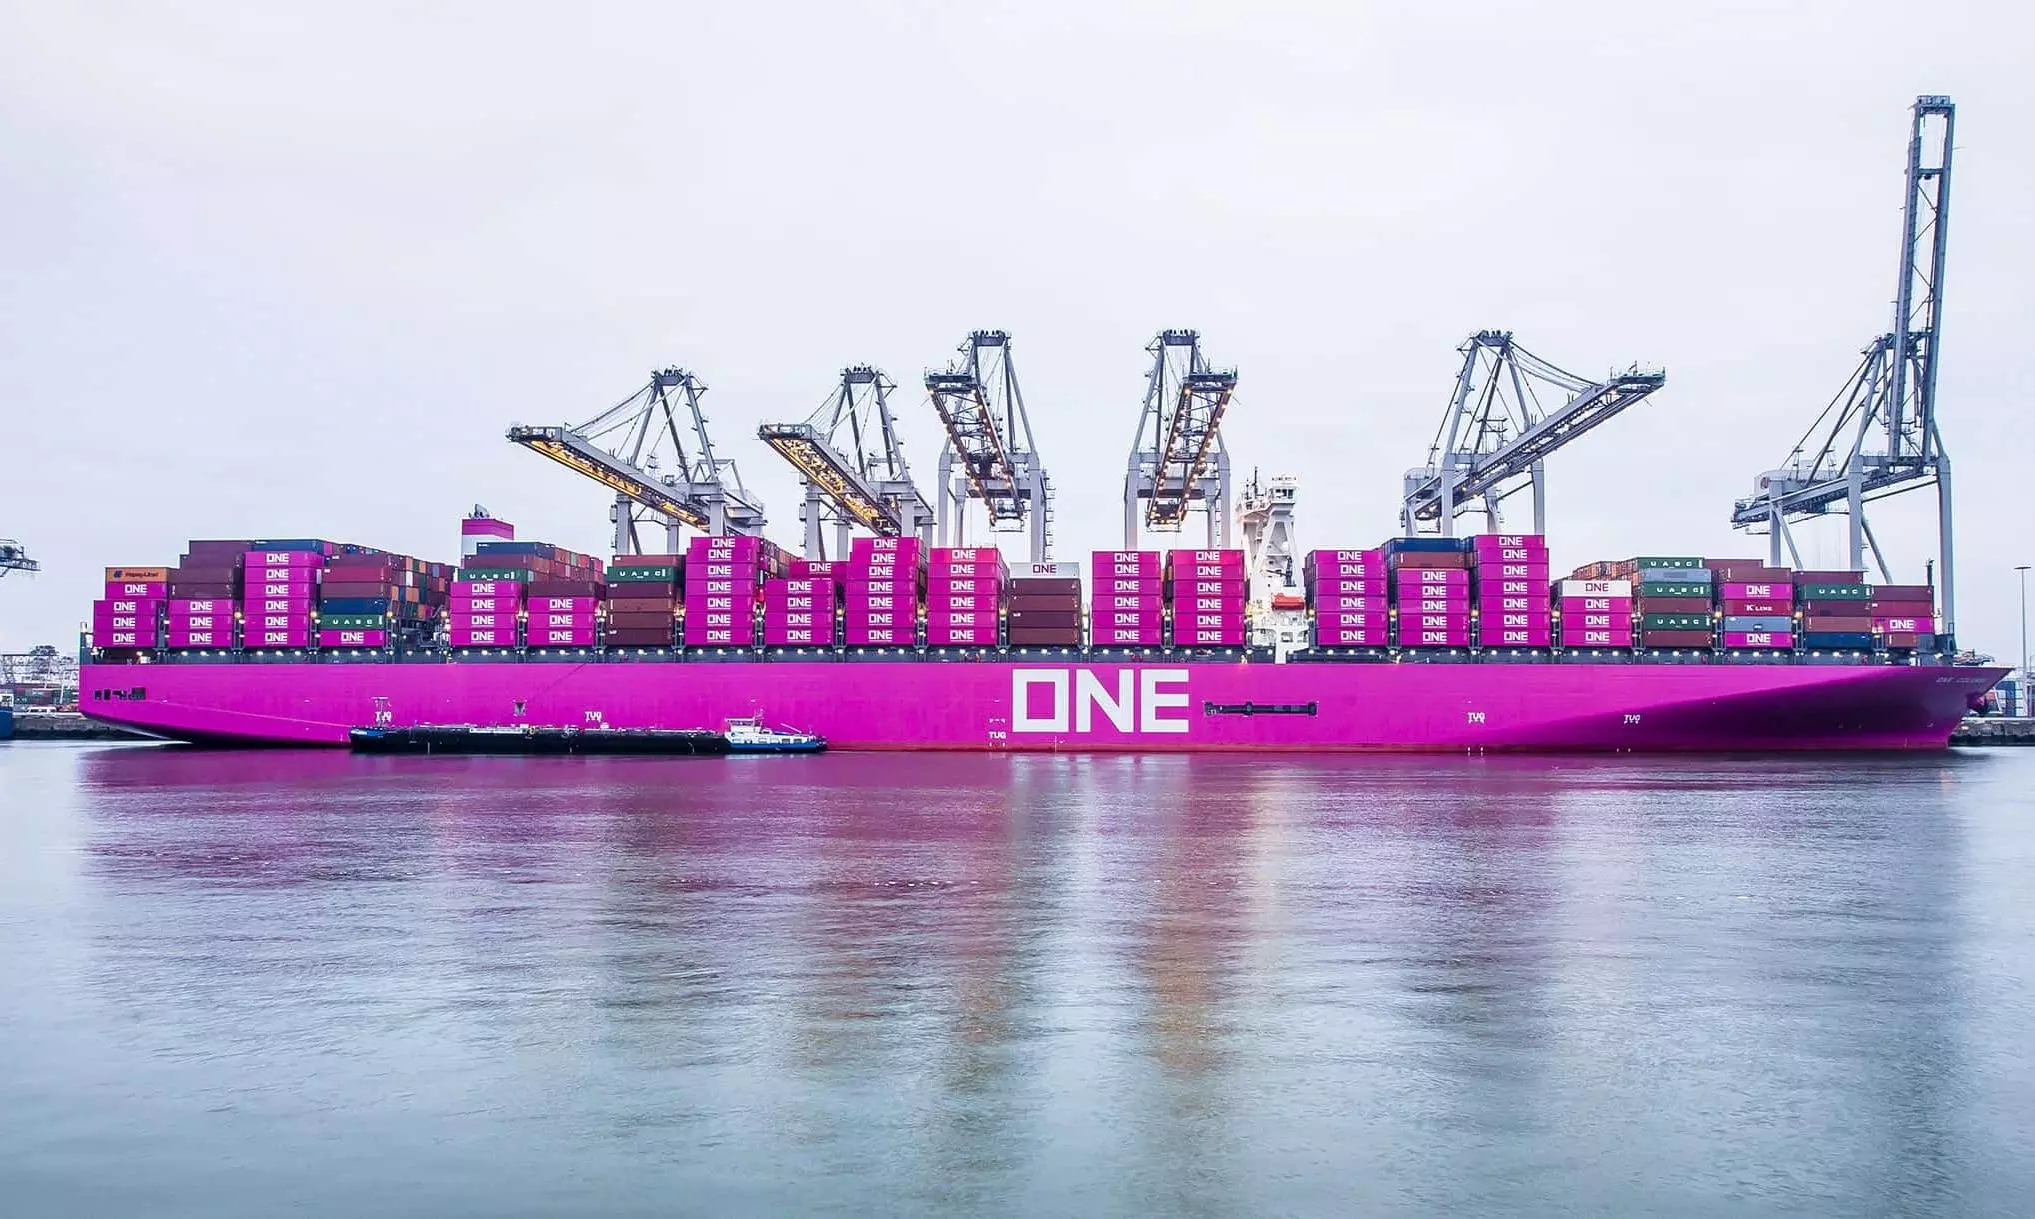 ONE launches West India-North America service